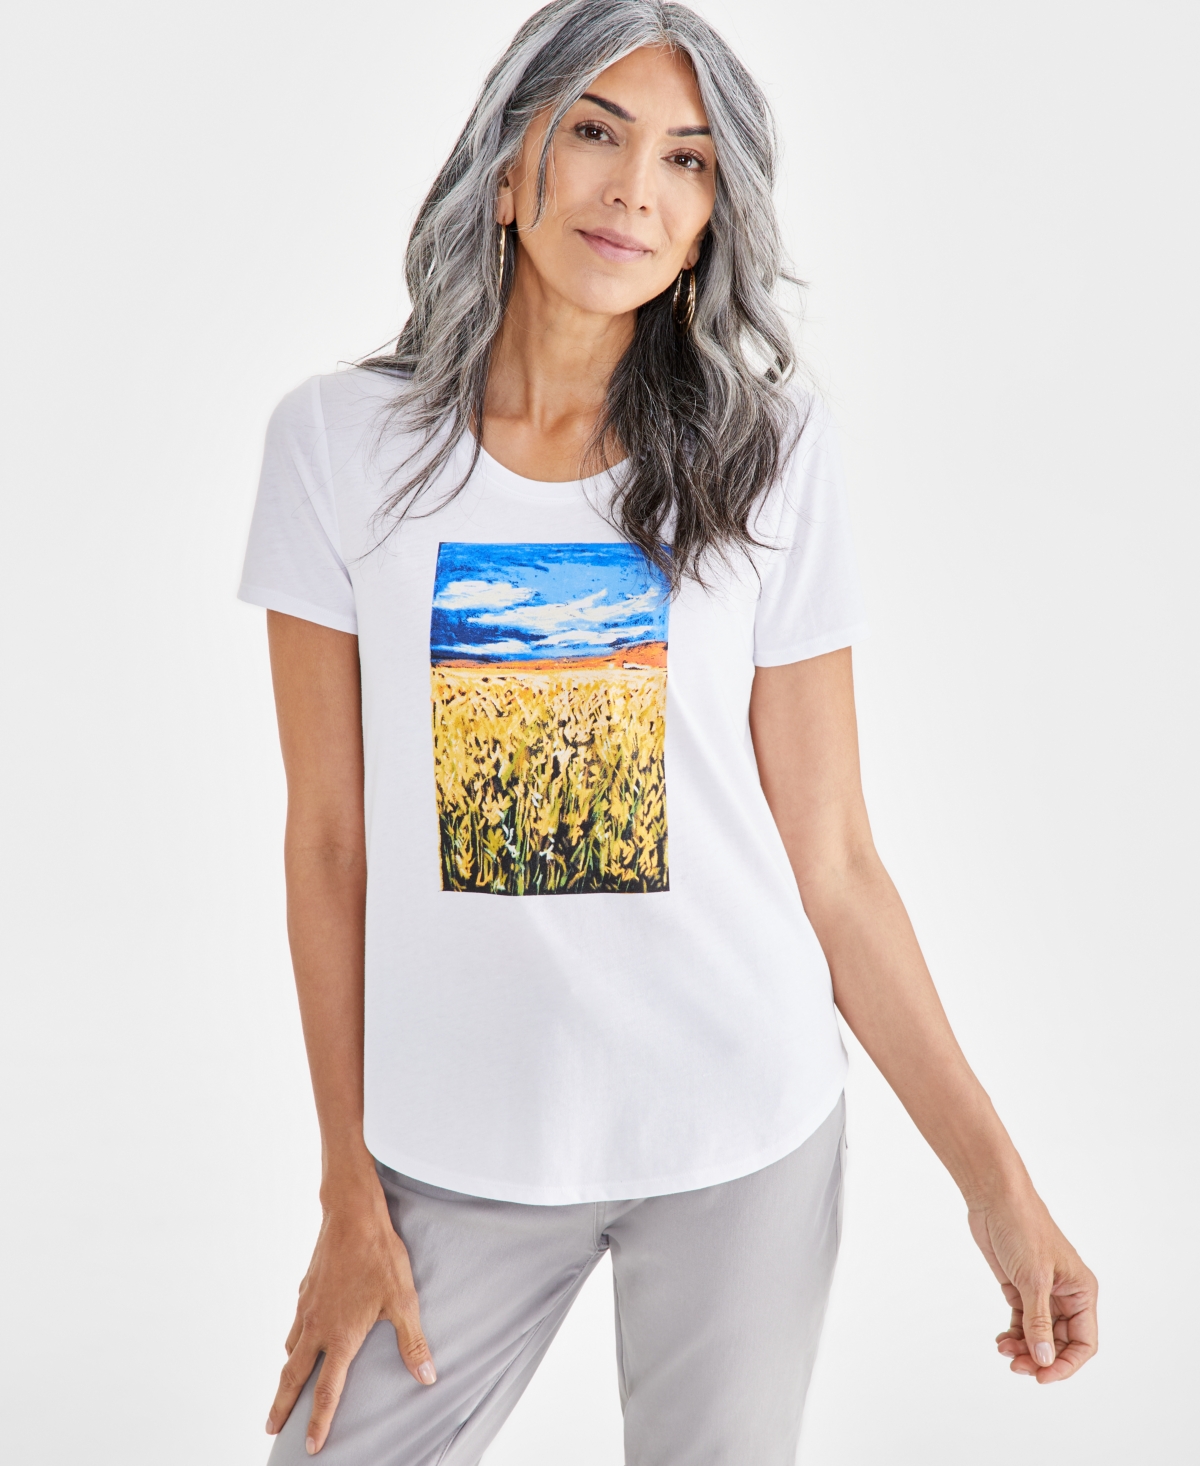 Women's Graphic Short-Sleeve T-Shirt, Created for Macy's - Floral Field